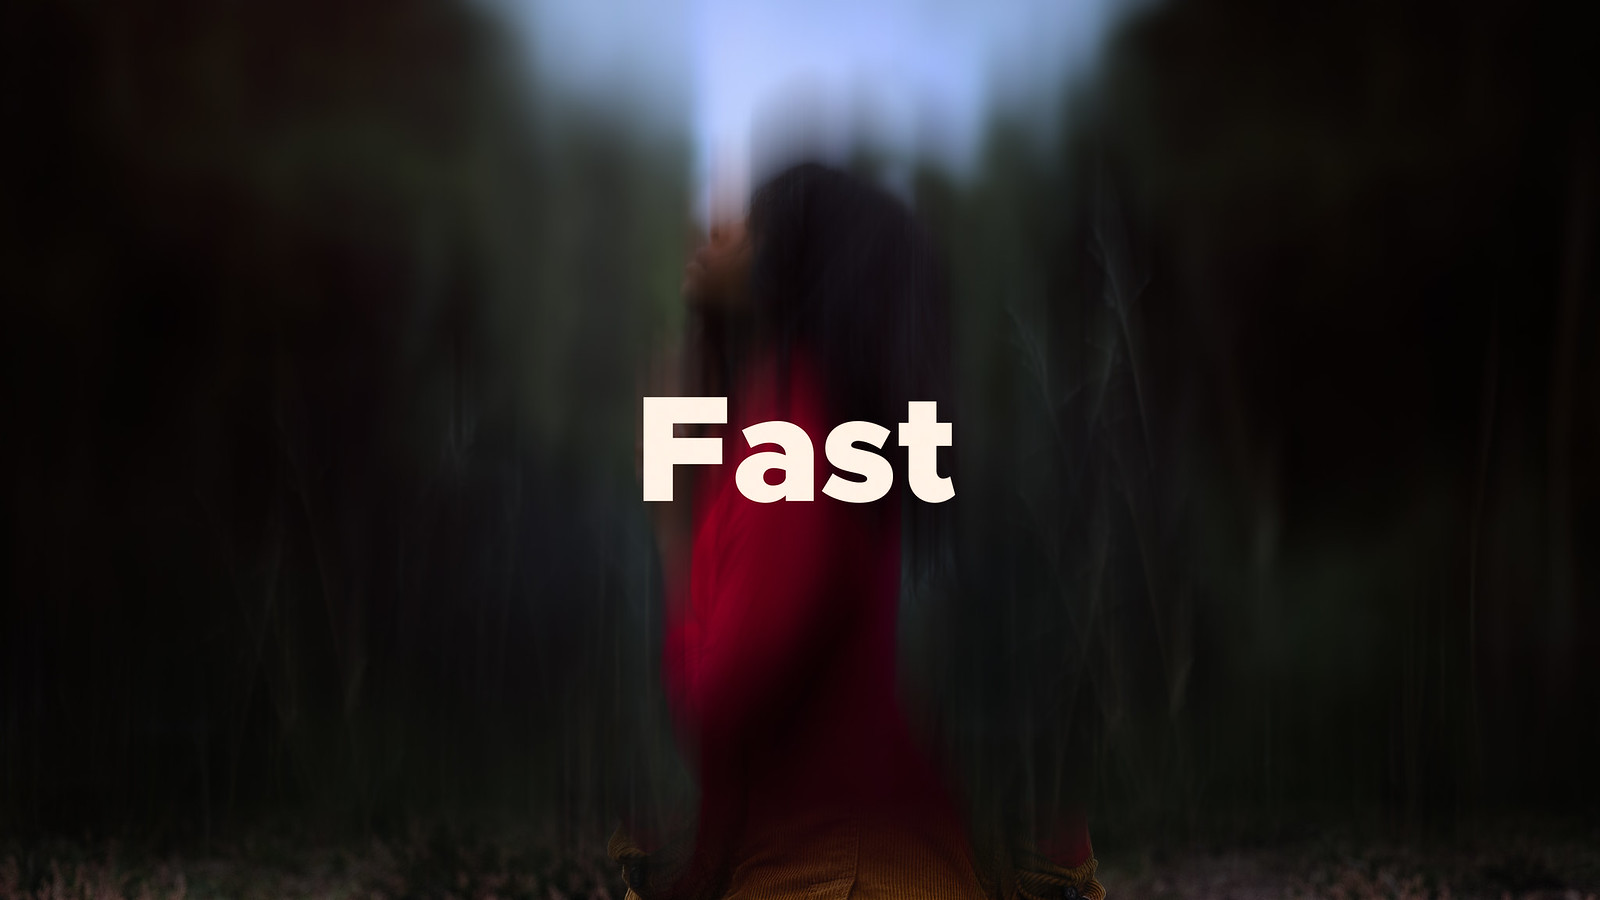 Videohive - Fast Typographic Promo 19569546 [Last Update] - Free Download 